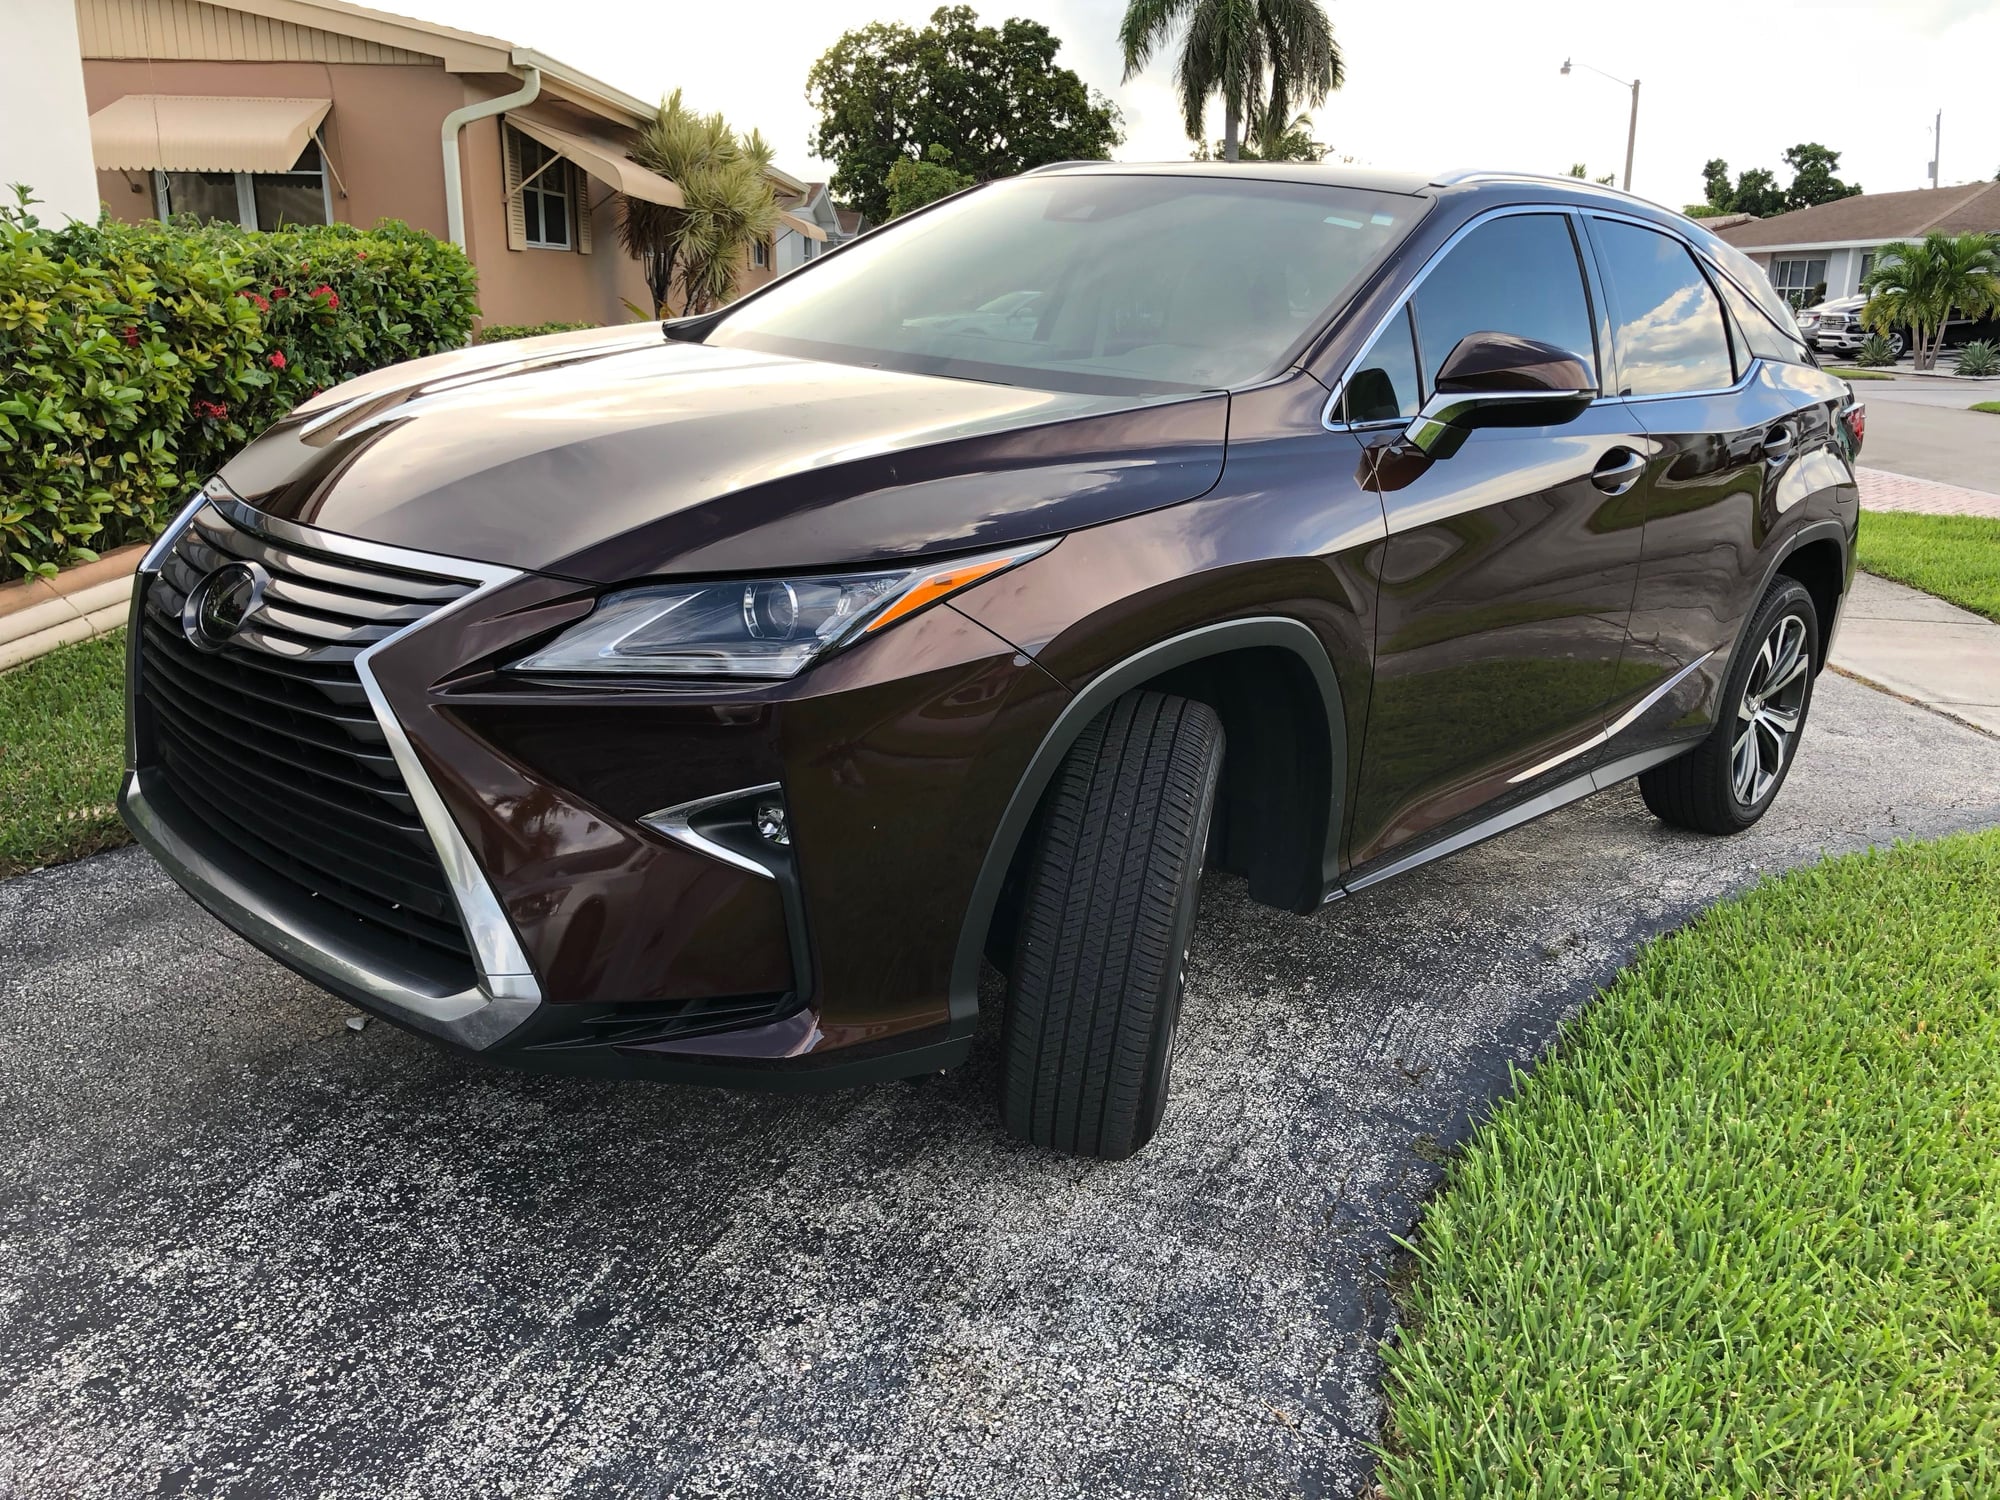 2017 Lexus RX350 - RX350 with 6000 miles.  Had it 5 months.  Perfect. - Used - VIN JTHBL5EF9E5133021 - 6,000 Miles - 6 cyl - 2WD - Automatic - SUV - Brown - Miami, FL 33179, United States